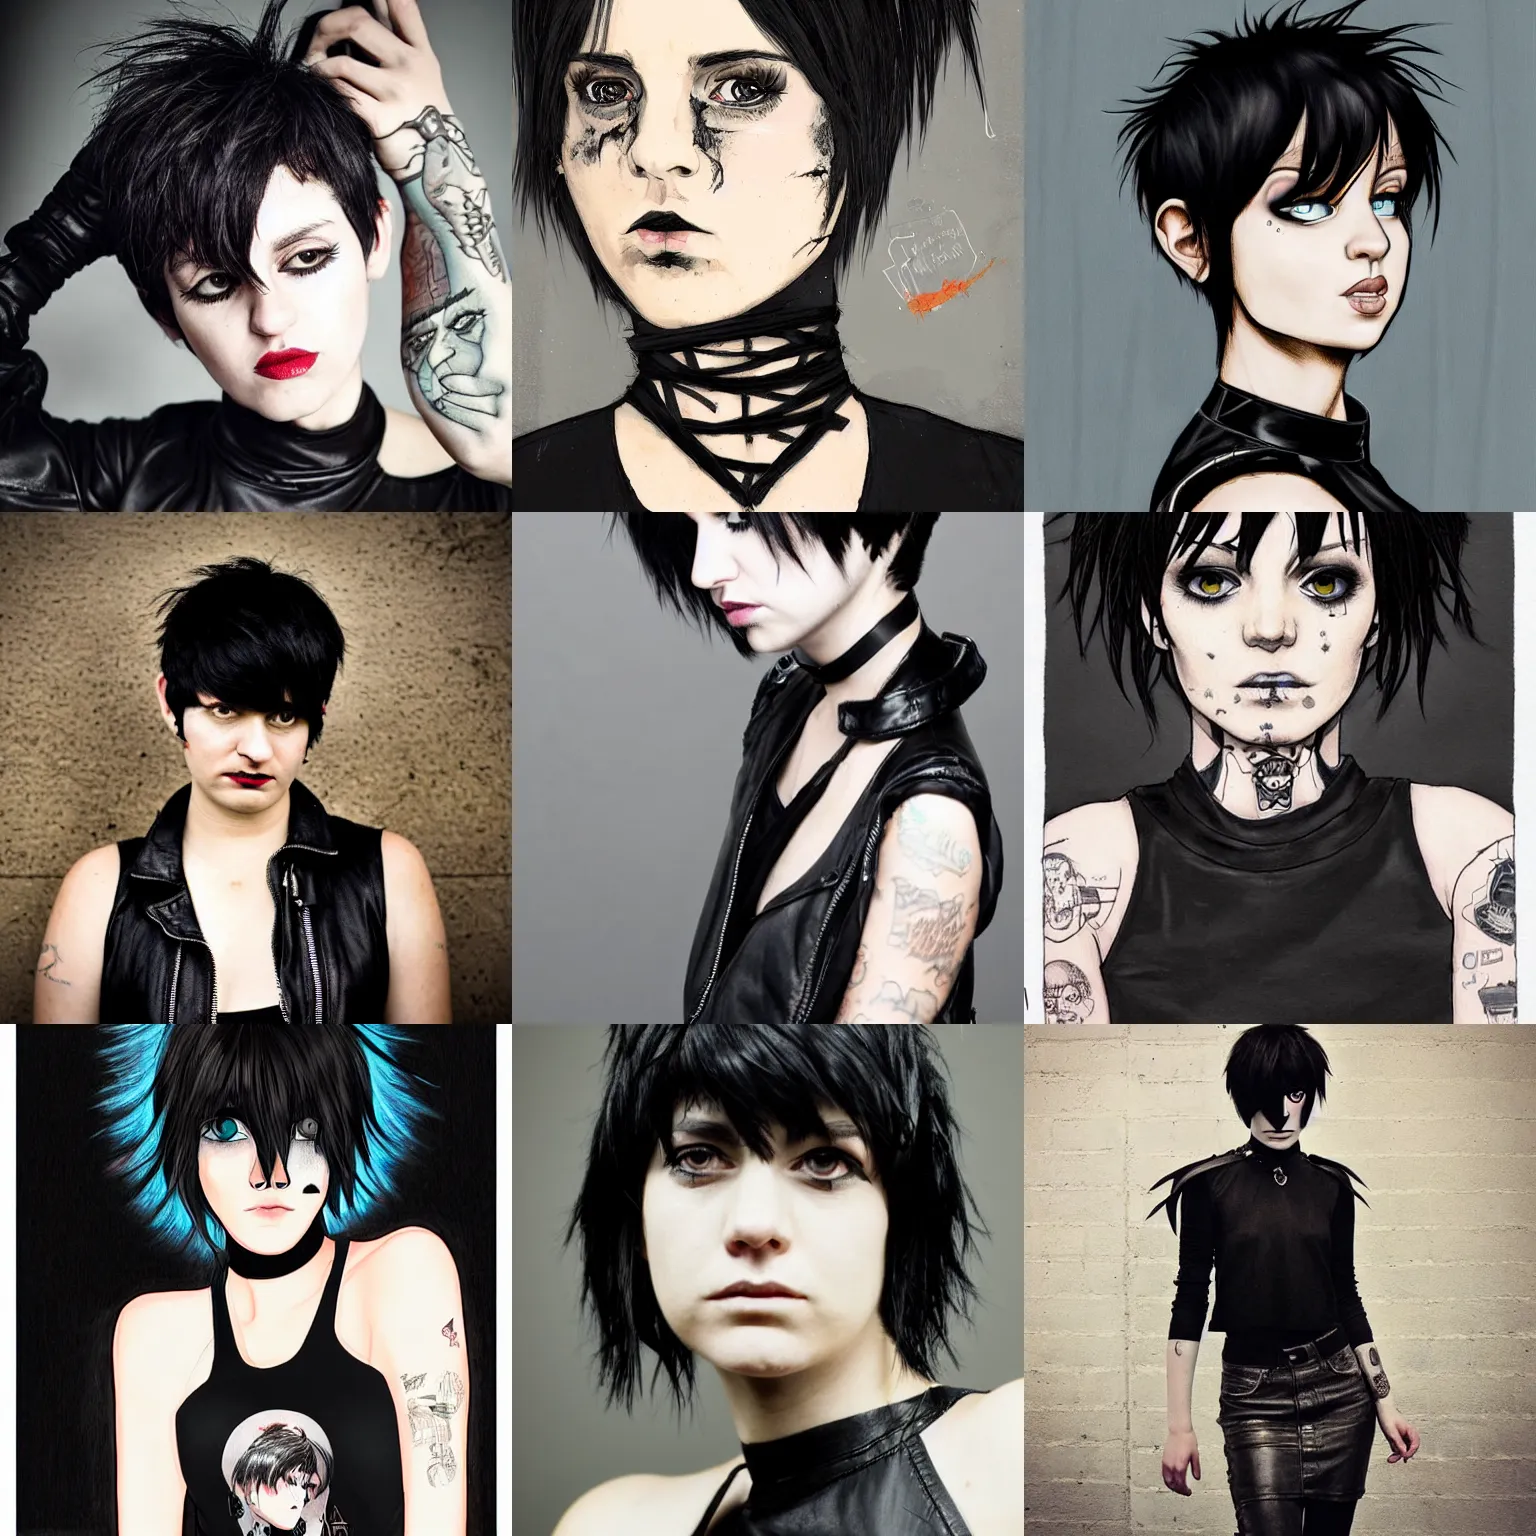 Prompt: an emo portrait by josan gonzalez. her hair is dark brown and cut into a short, messy pixie cut. she has a slightly rounded face, with a pointed chin, large entirely - black eyes, and a small nose. she is wearing a black tank top, a black leather jacket, a black knee - length skirt, a black choker, and black leather boots.